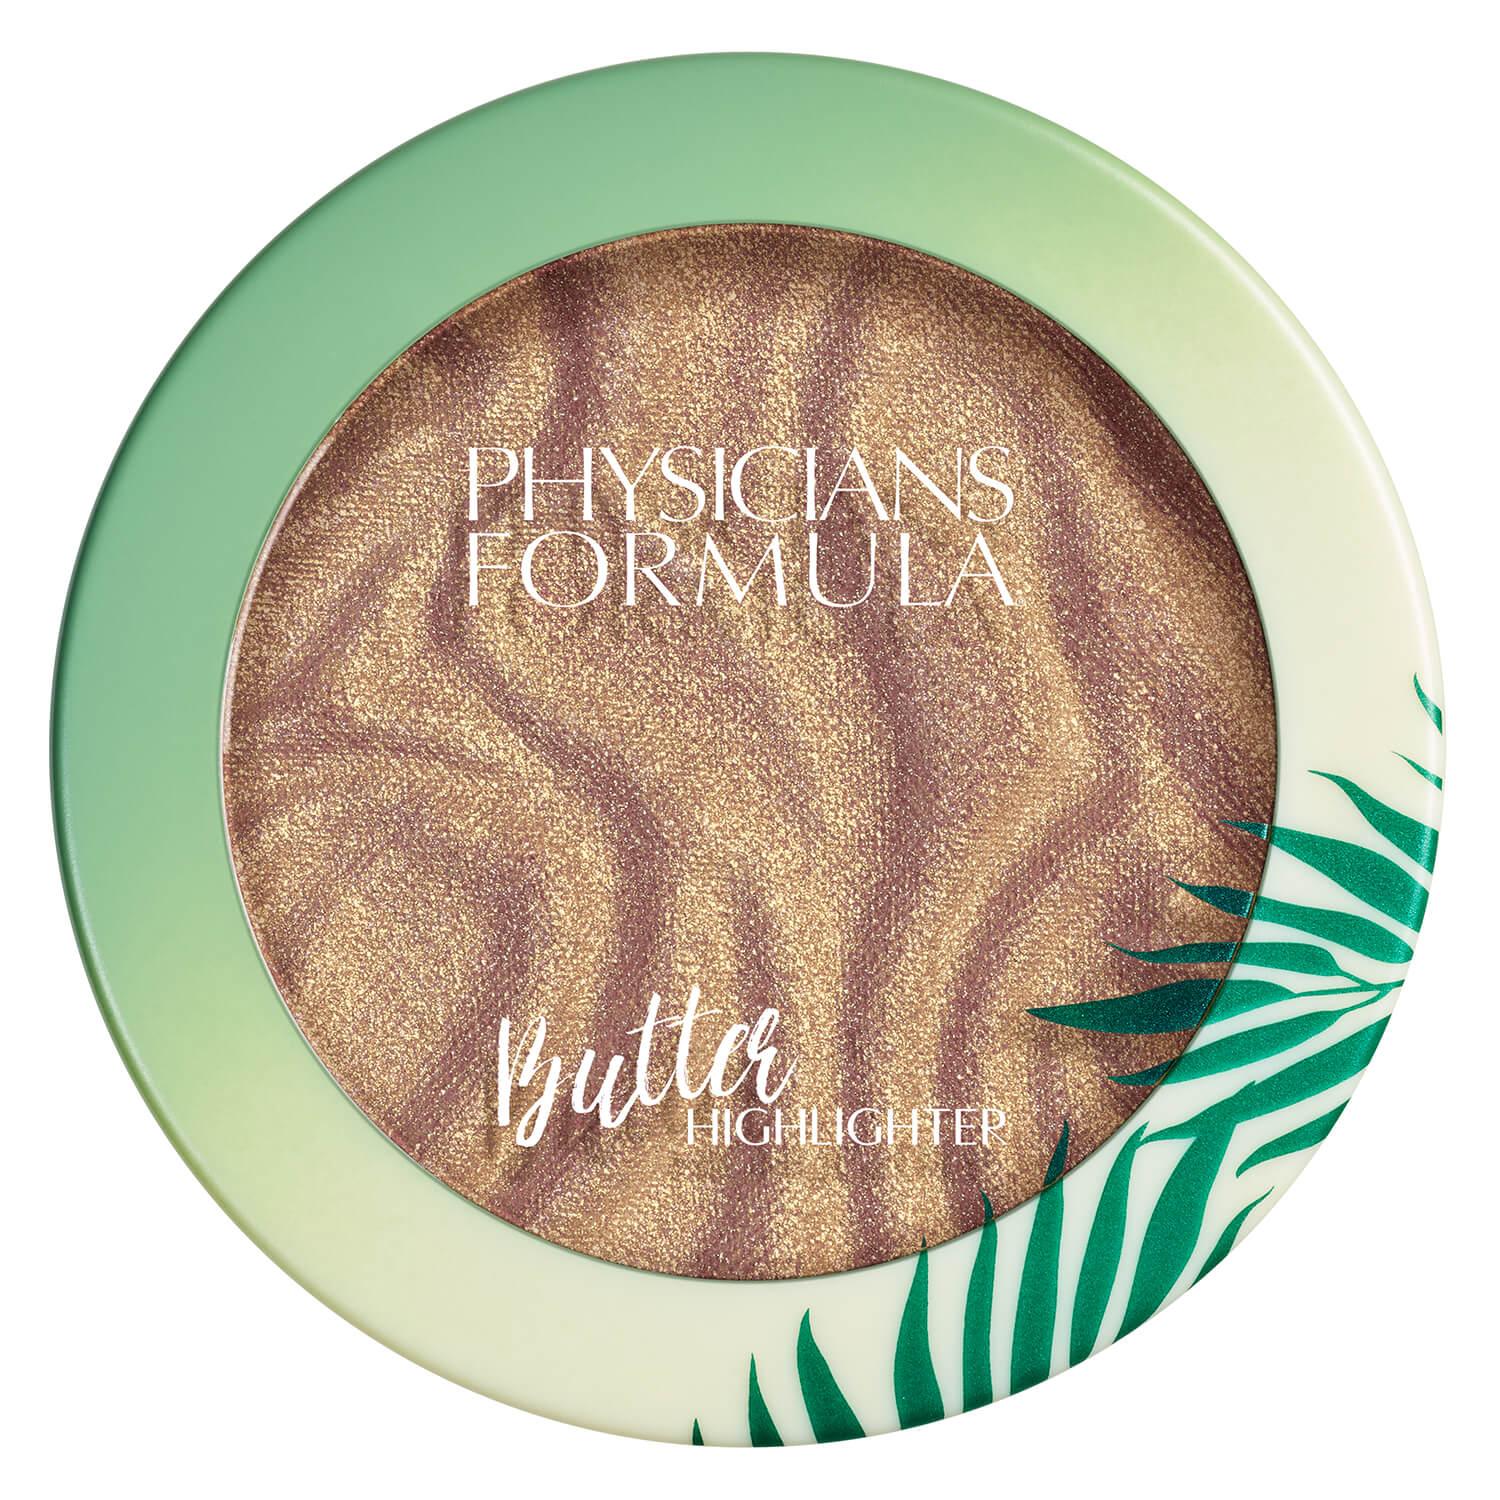 PHYSICIANS FORMULA - Butter Highlighter Champagne